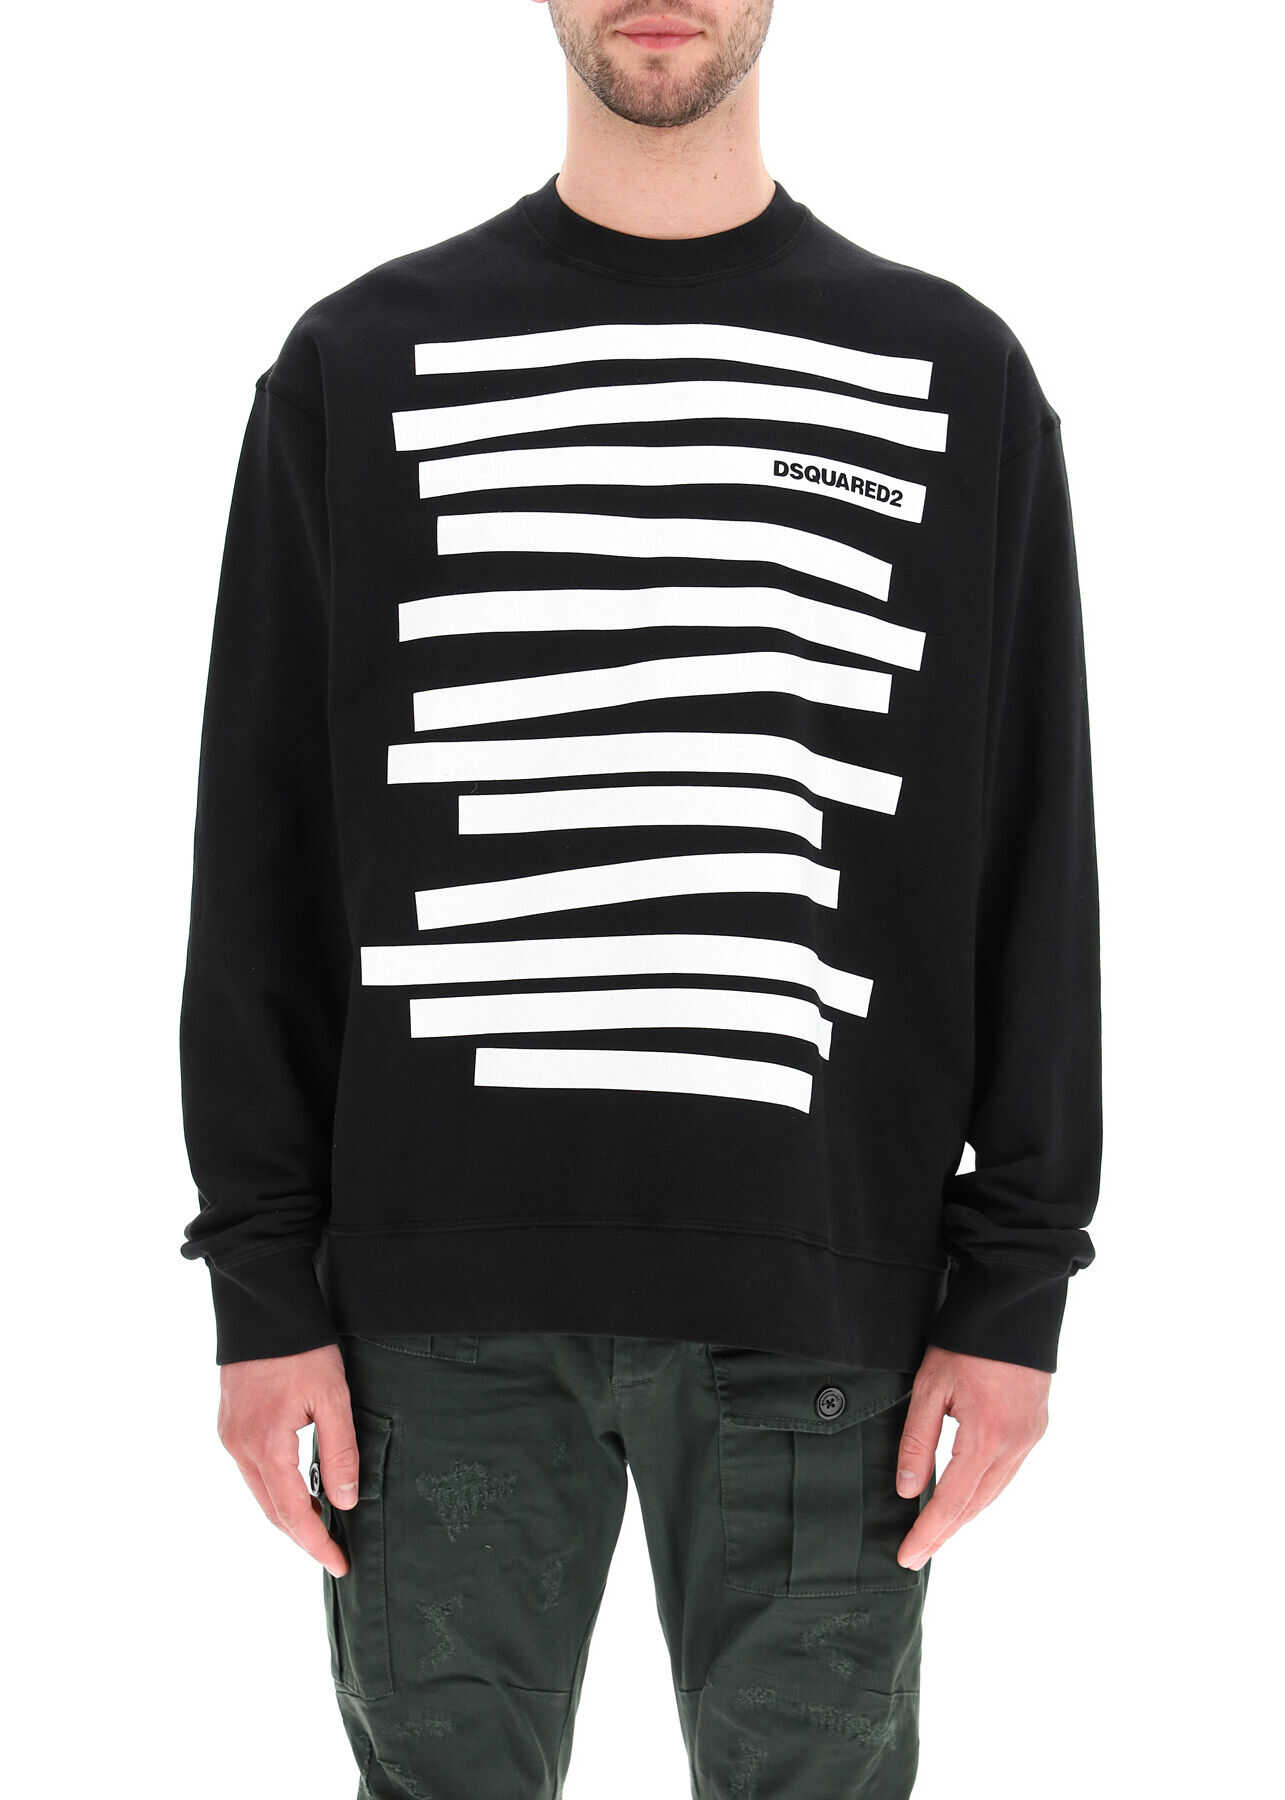 DSQUARED2 Sweatshirt With Stripes And Logo S71GU0436 S25462 BLACK